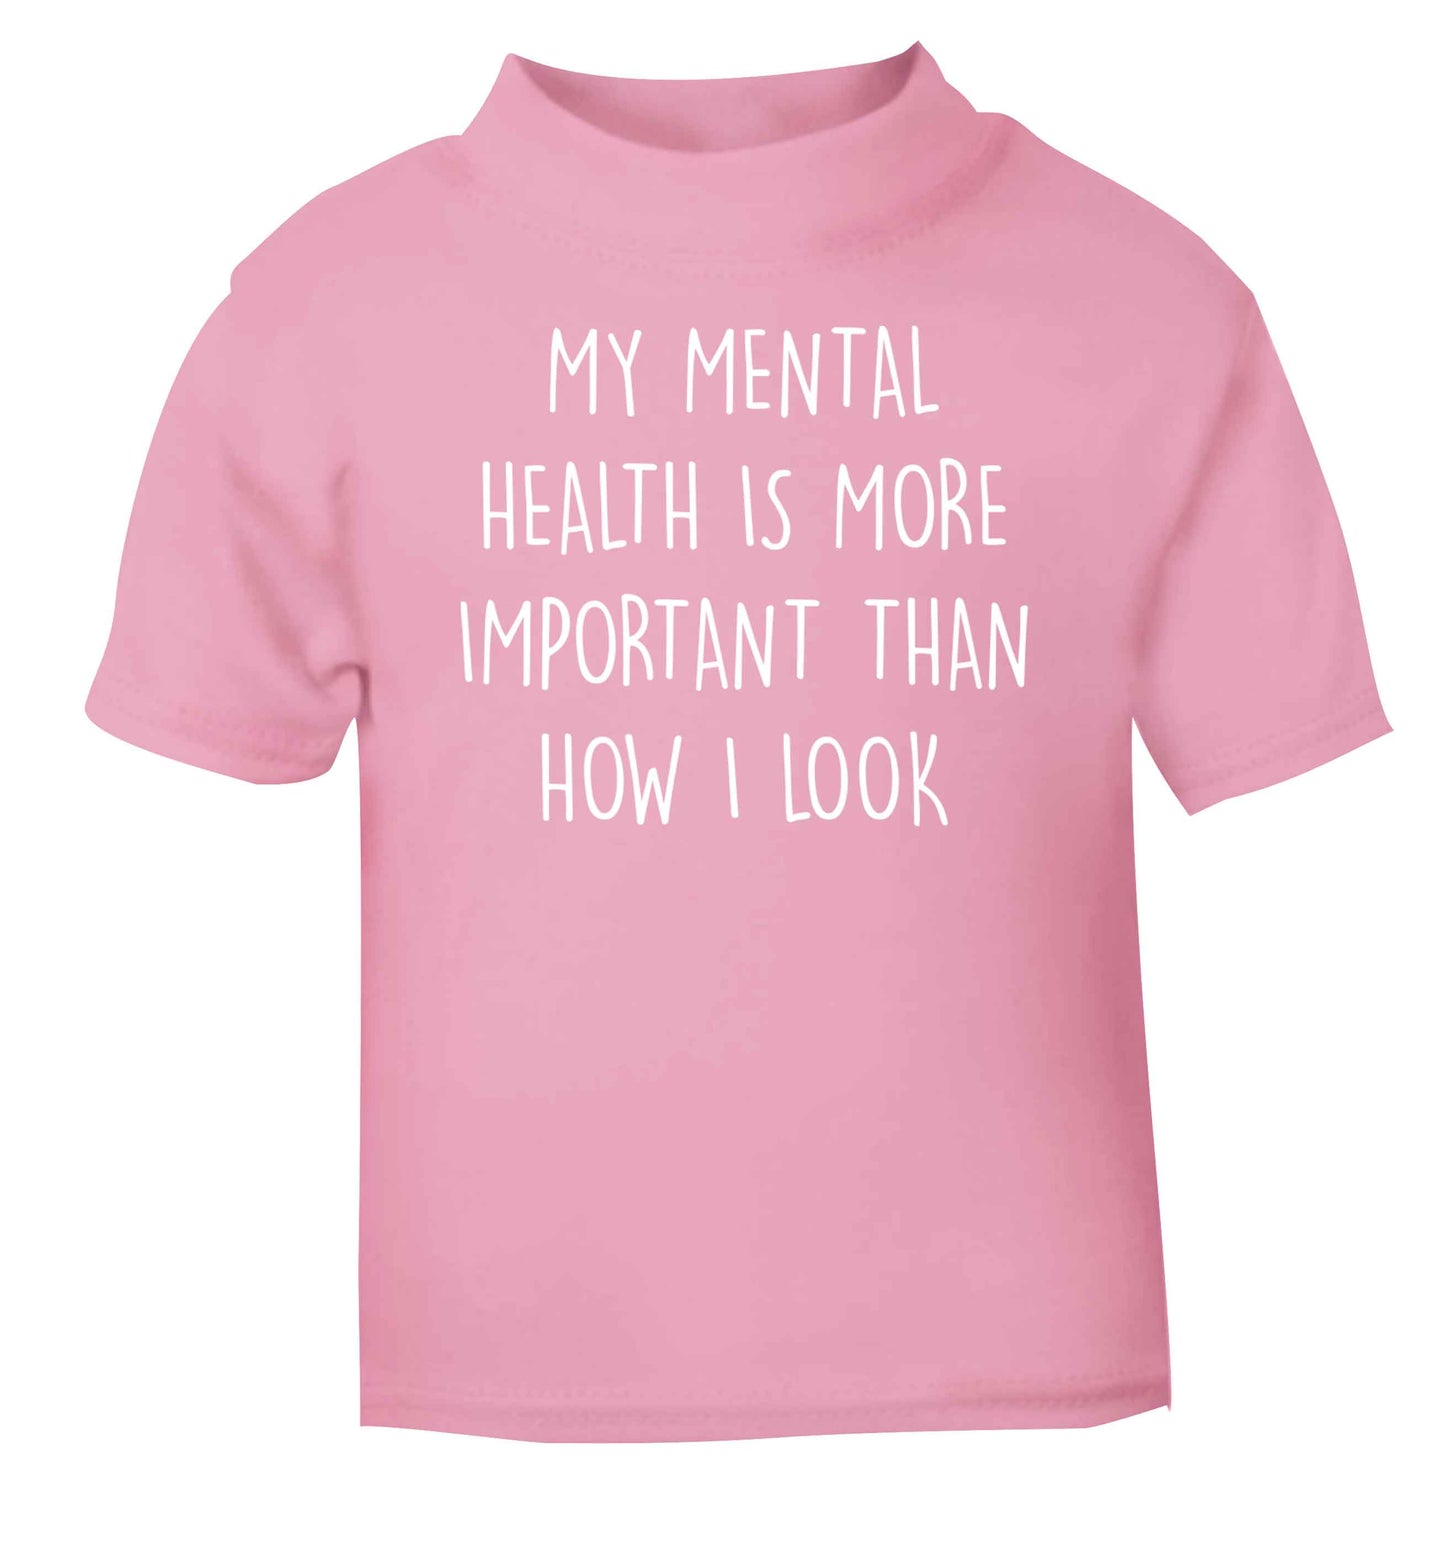 My mental health is more importnat than how I look light pink baby toddler Tshirt 2 Years